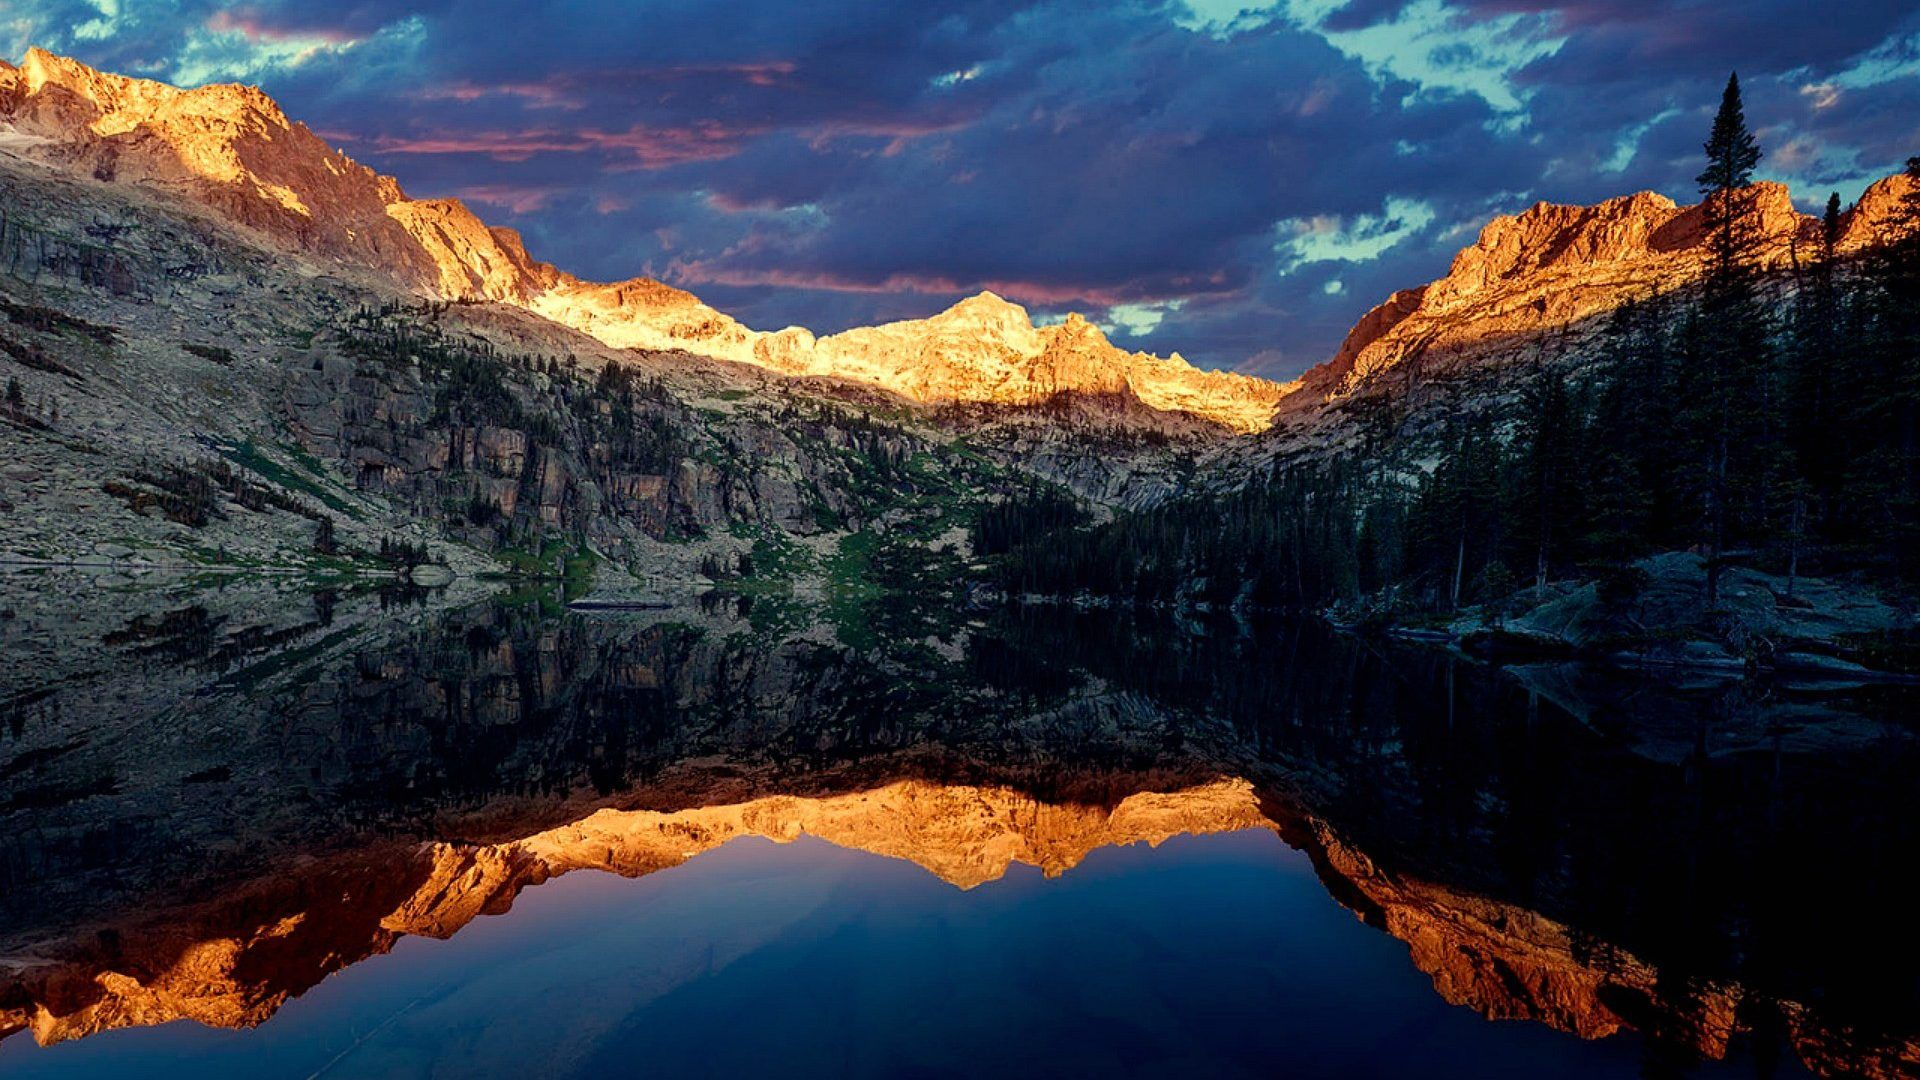 1920x1080 Mountain Pics Wallpaper Wonderful HDQ Live Mountain Photos | Cool places to visit, Rocky mountain national park, National parks trip